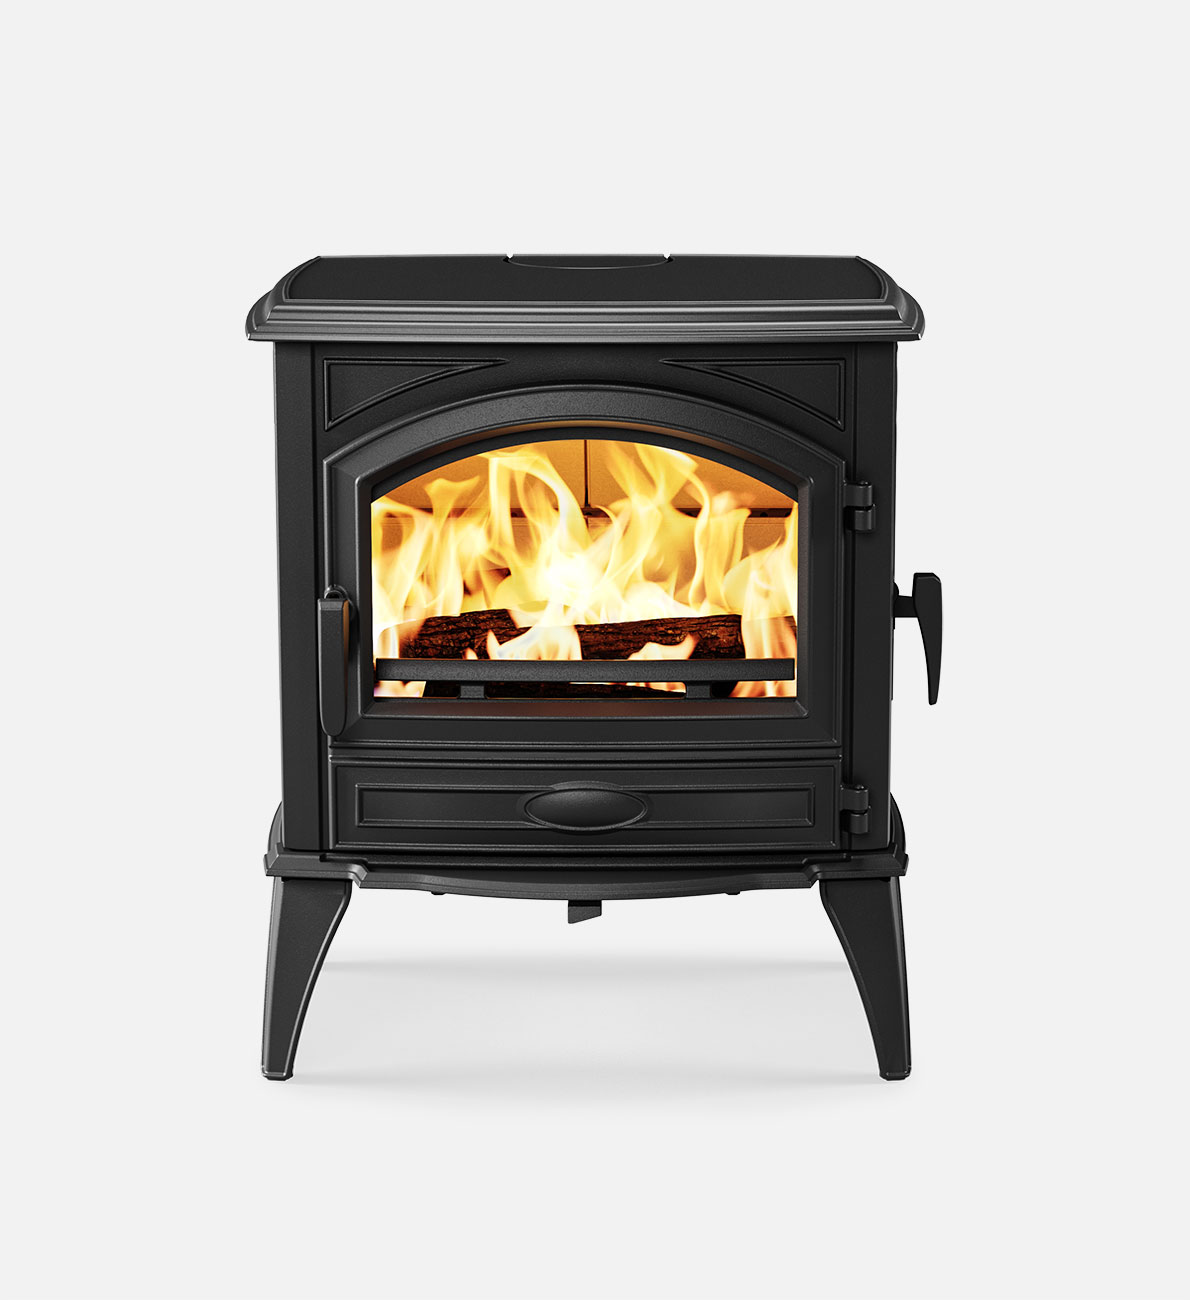 Dovre peisovn 640 wd front